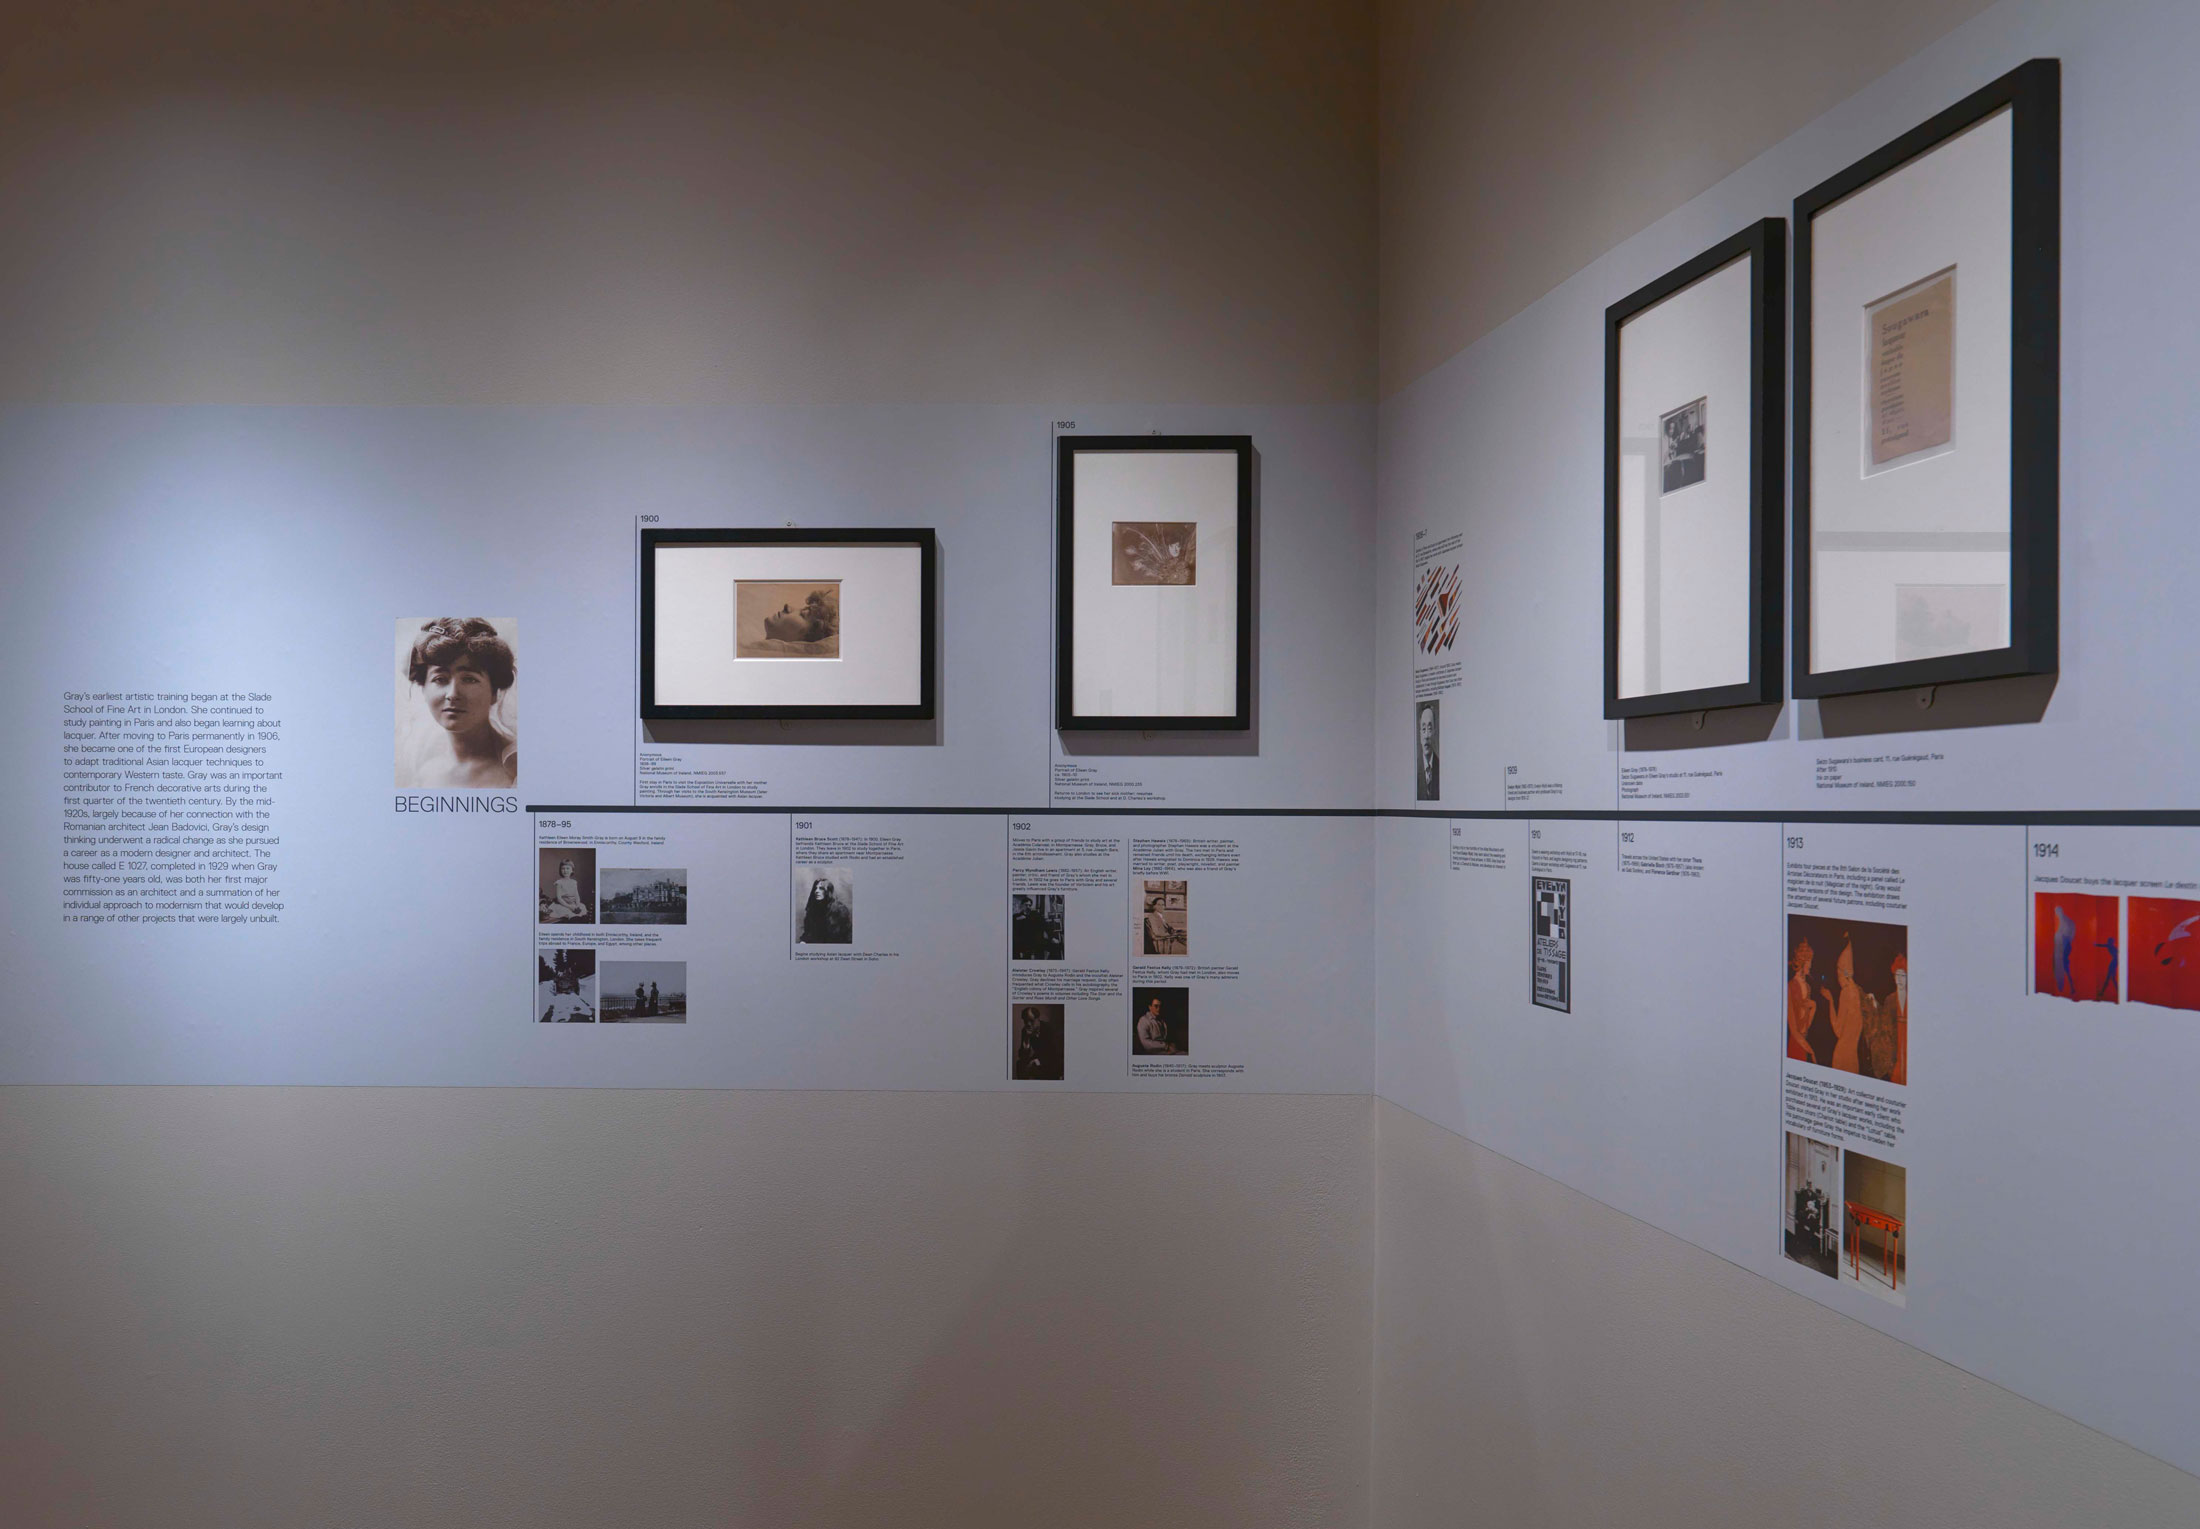 Exhibition view of timeline of Eileen Gray's life.